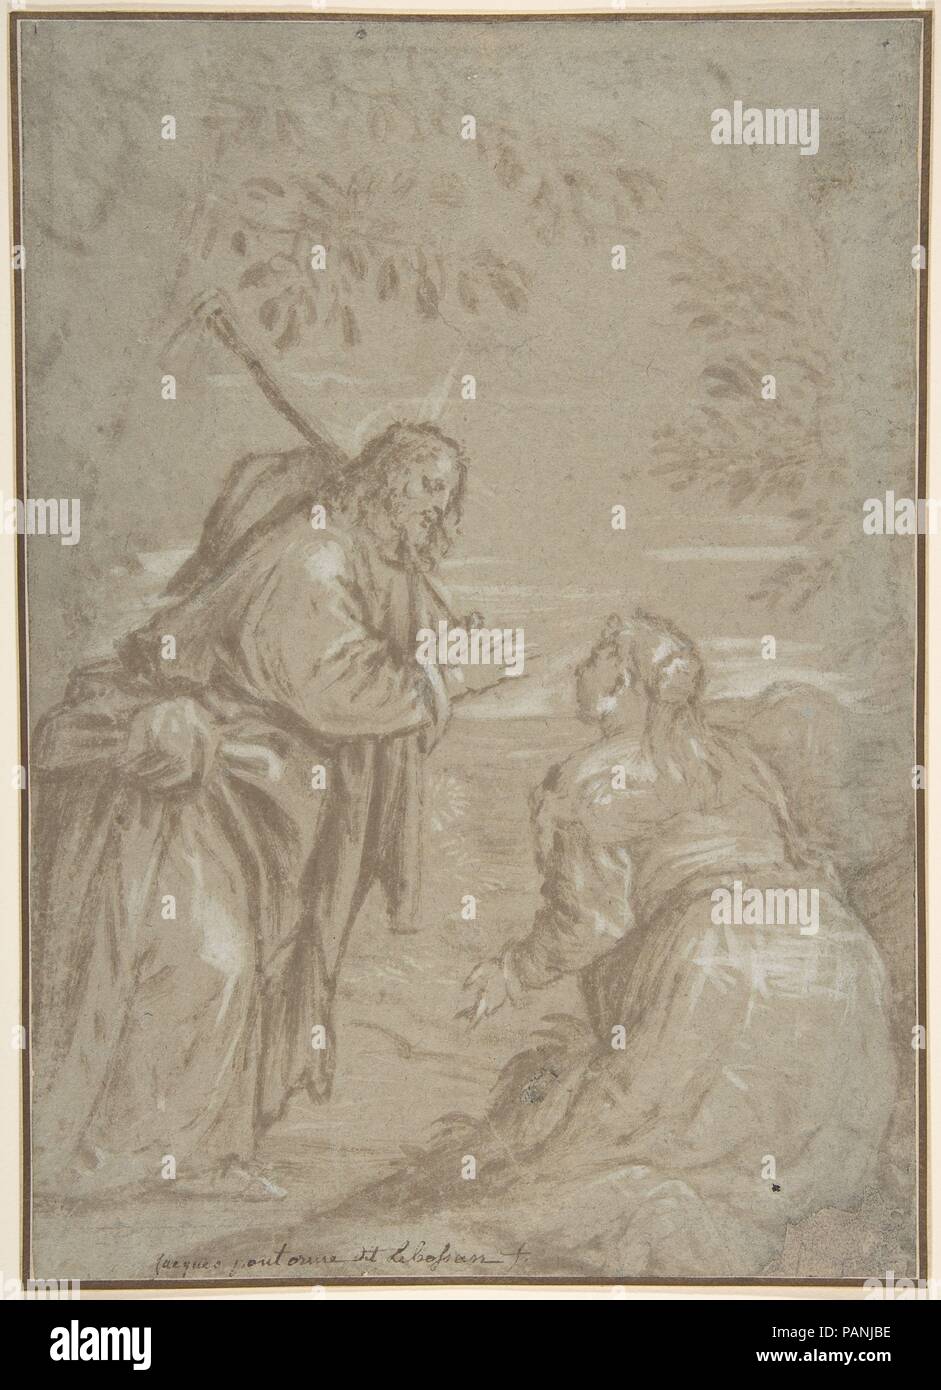 Christ Appearing to Saint Mary Magdalen ('Noli Me Tangere'). Artist: Attributed to Jacopo Bassano (Jacopo da Ponte) (Italian, Bassano del Grappa ca. 1510-1592 Bassano del Grappa). Dimensions: sheet: 12 3/16 x 8 11/16 in. (31 x 22 cm). Date: ca. 1560.  In this expressively pictorial composition of the 'Noli me tangere' (John 20:14-18), done quickly with the brush and brown wash with white gouache highlights, the resurrected Christ, in the guise of a gardener, stands at left before the kneeling Saint Mary Magdalen on the right, who is seen from behind. The present sheet, acquired in 2008, marks  Stock Photo